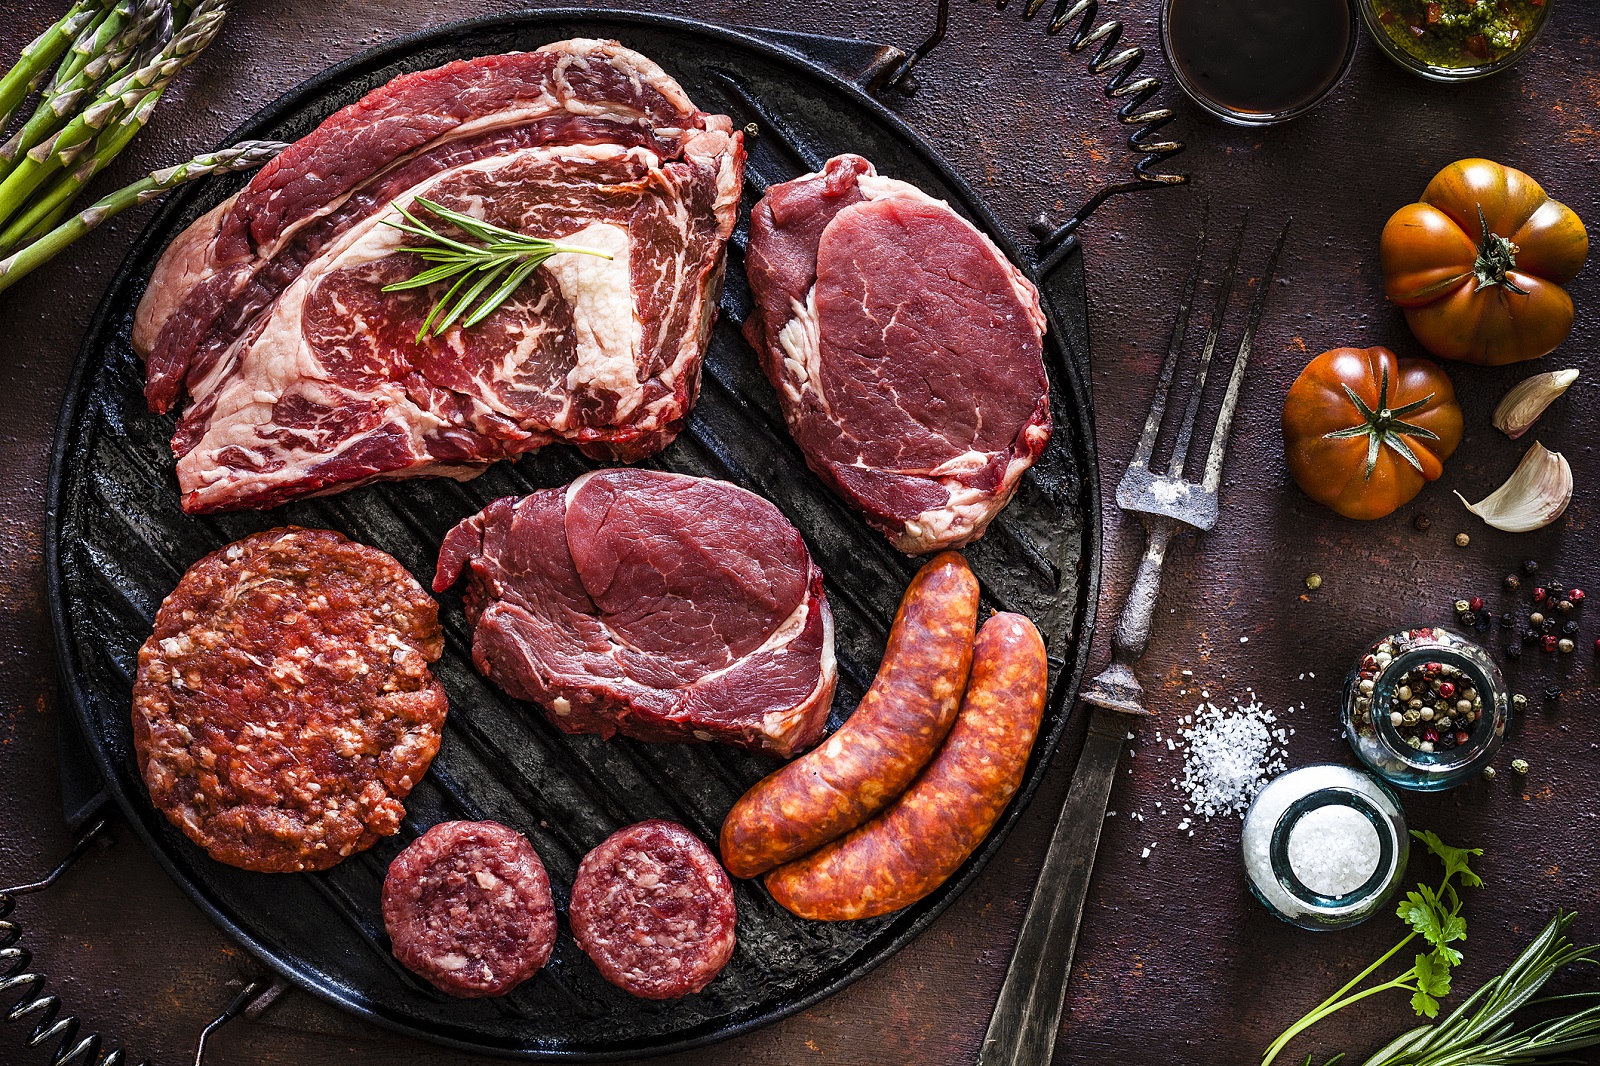 Various cuts of raw meat shot from above on rustic kitchen table. The cuts are on a cast iron grill and includes Angus steak, tenderloin, sausages and hamburger meat. The grill is surrounded by herbs, vegetables and spices for cooking meat like peppercorns, salt, garlic, tomatoes, asparagus and rosemary. A vintage fork is included in the composition. Predominant colors are red and brown. Low key DSRL studio photo taken with Canon EOS 5D Mk II and Canon EF 100mm f/2.8L Macro IS USM.